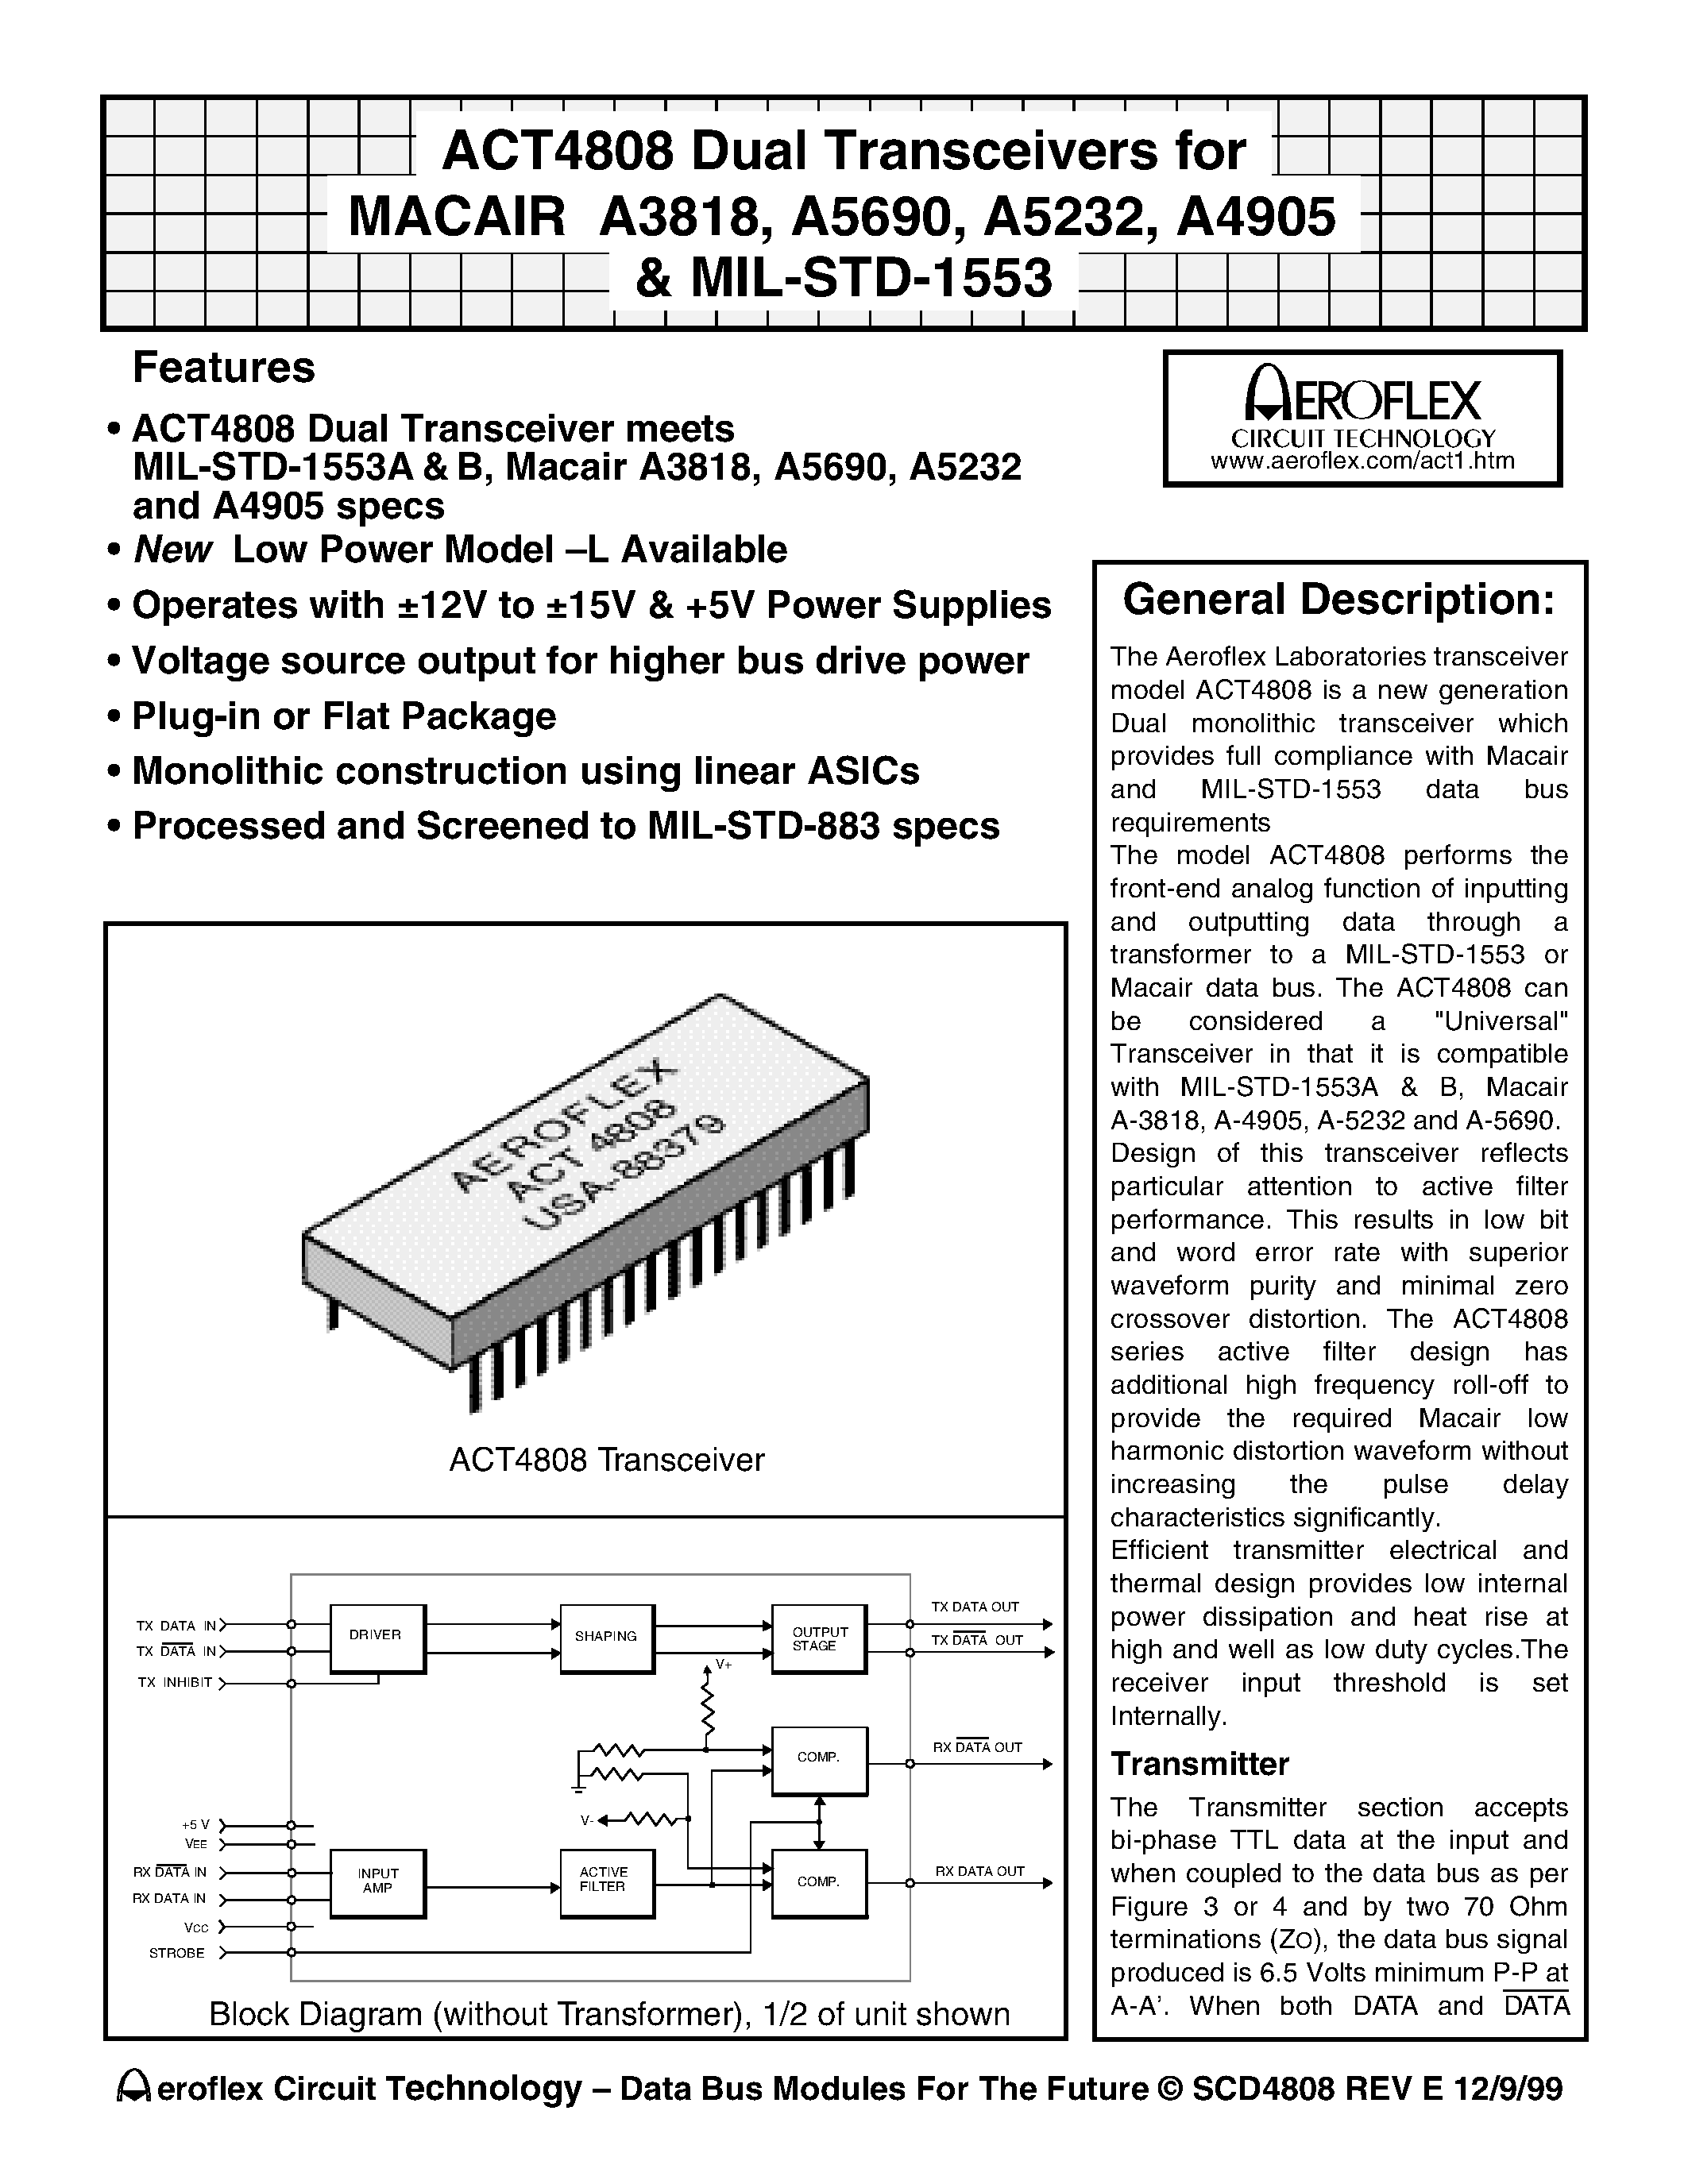 Datasheet ACT4808LD - ACT4808 DUAL TRANSCEIVERS FOR MACAIR A3818/ A5690/ A5232/ A4905 & MIL-STD-1553 page 1